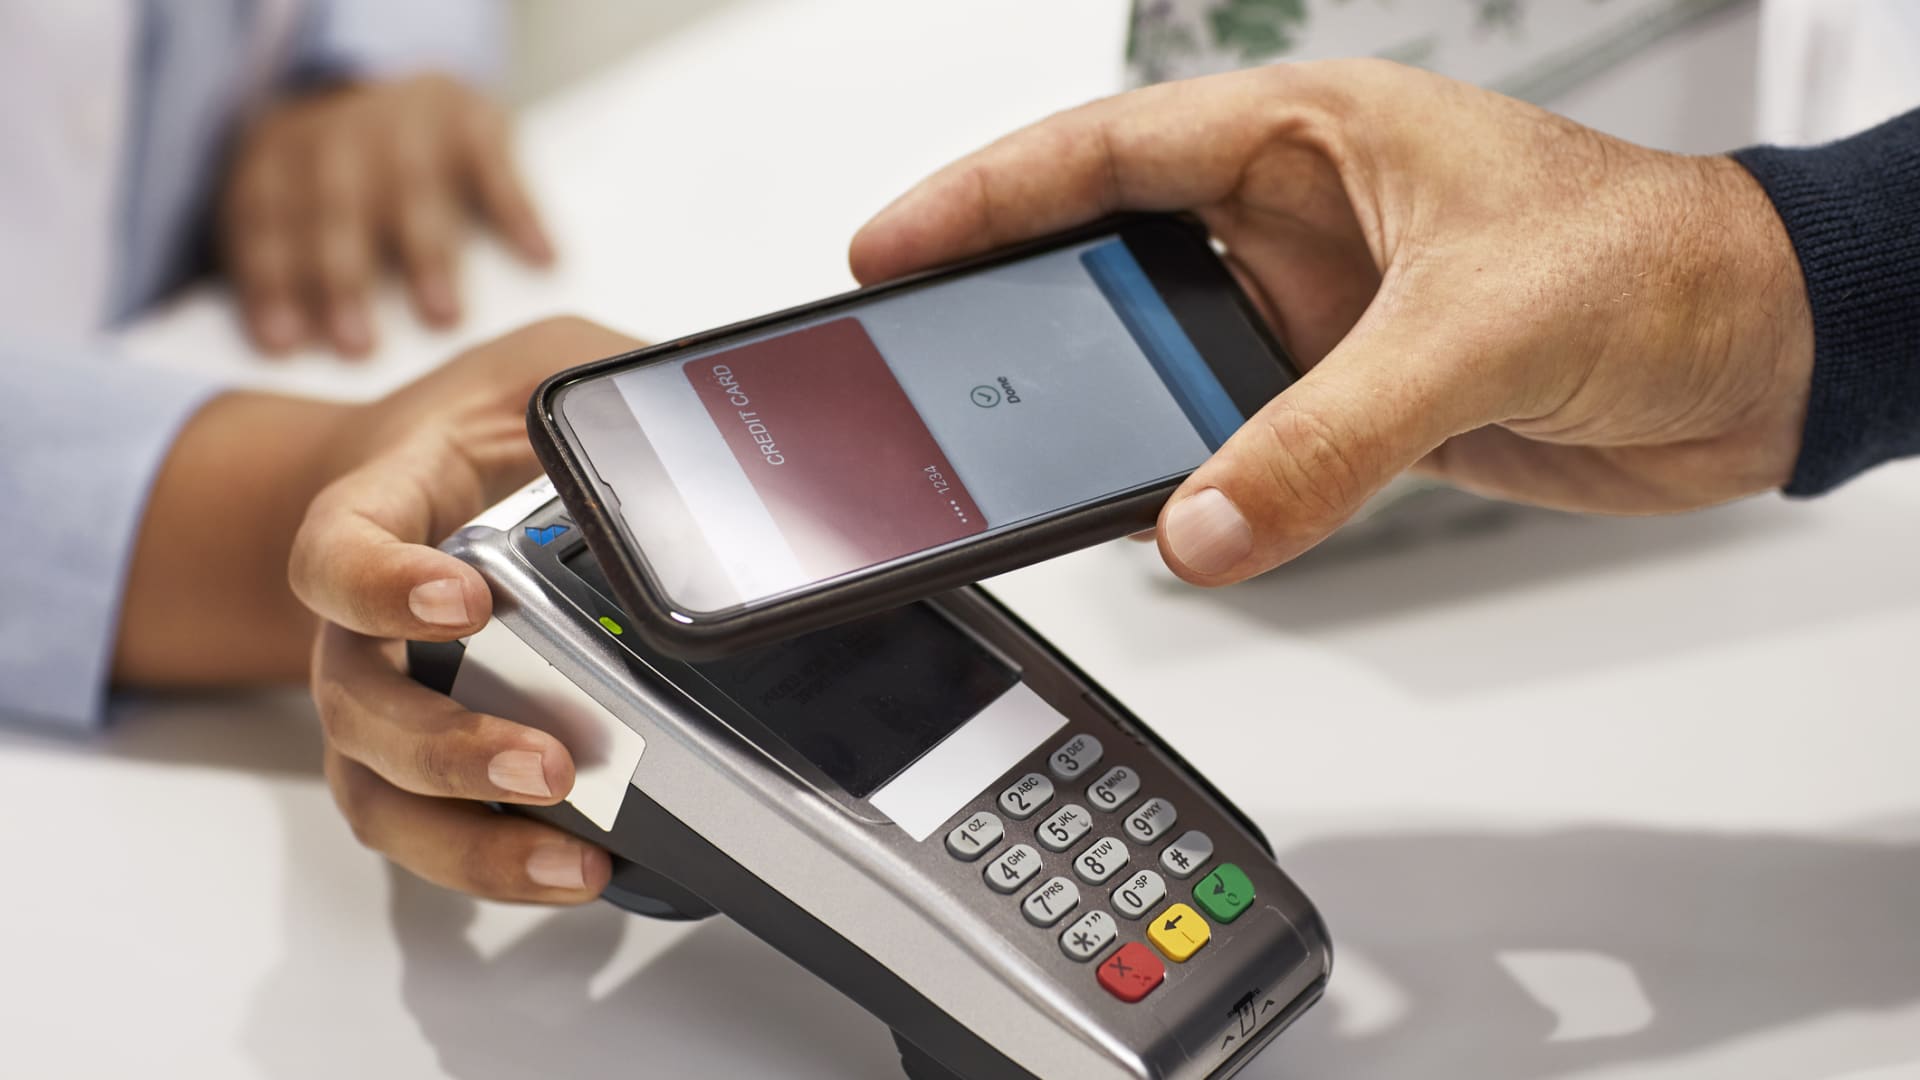 Are digital wallets safe? Here’s what to know as the battle between big banks and Apple Pay heats up